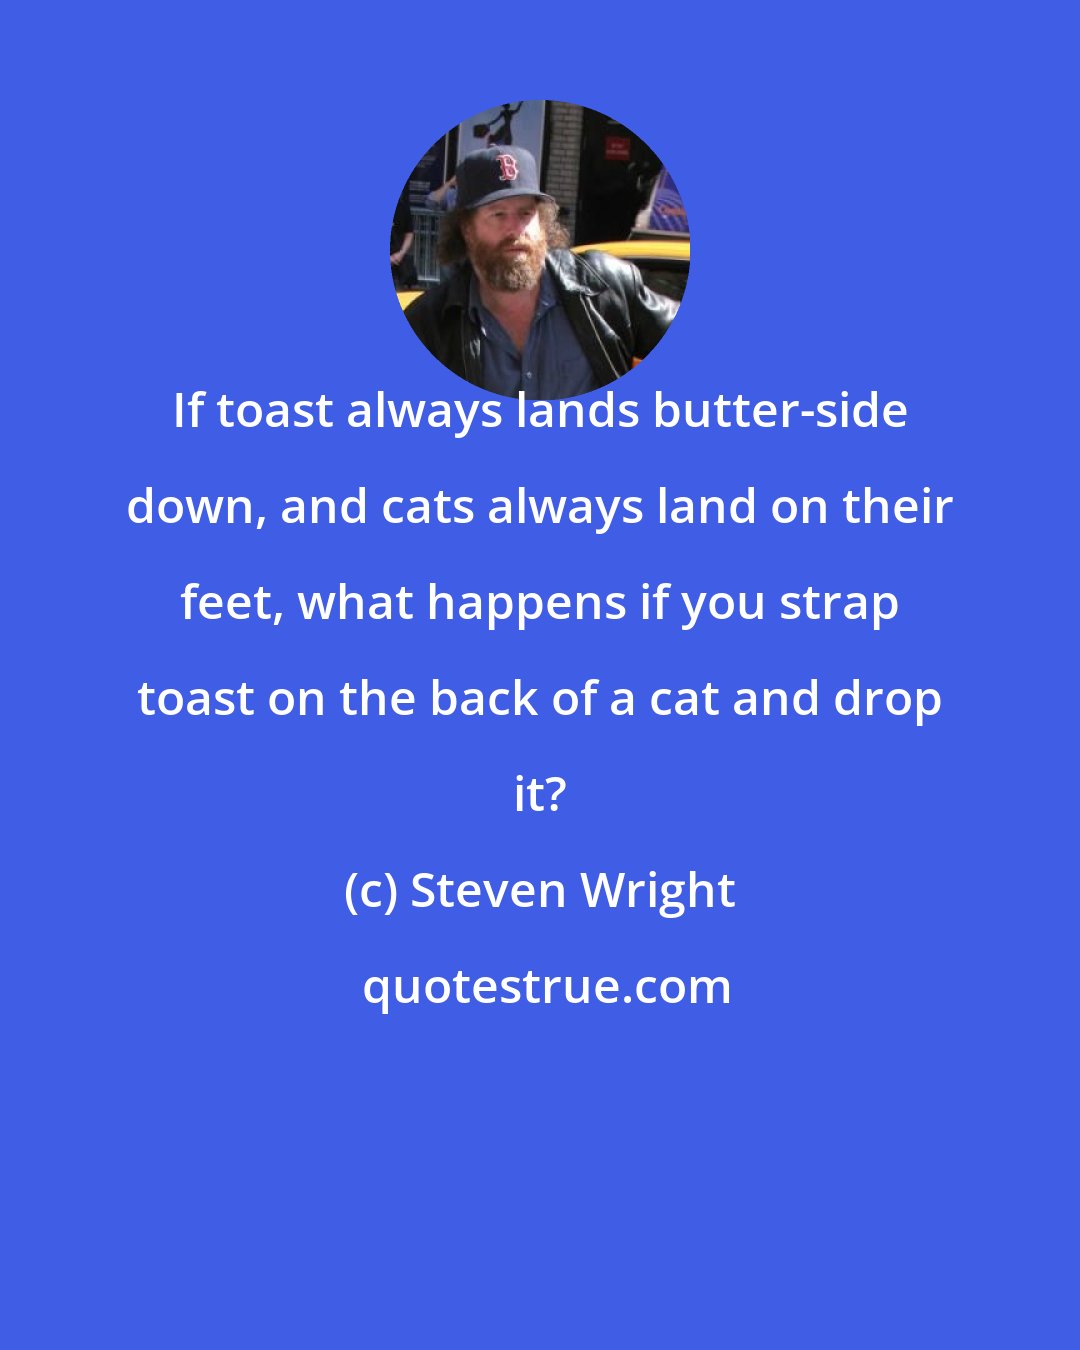 Steven Wright: If toast always lands butter-side down, and cats always land on their feet, what happens if you strap toast on the back of a cat and drop it?